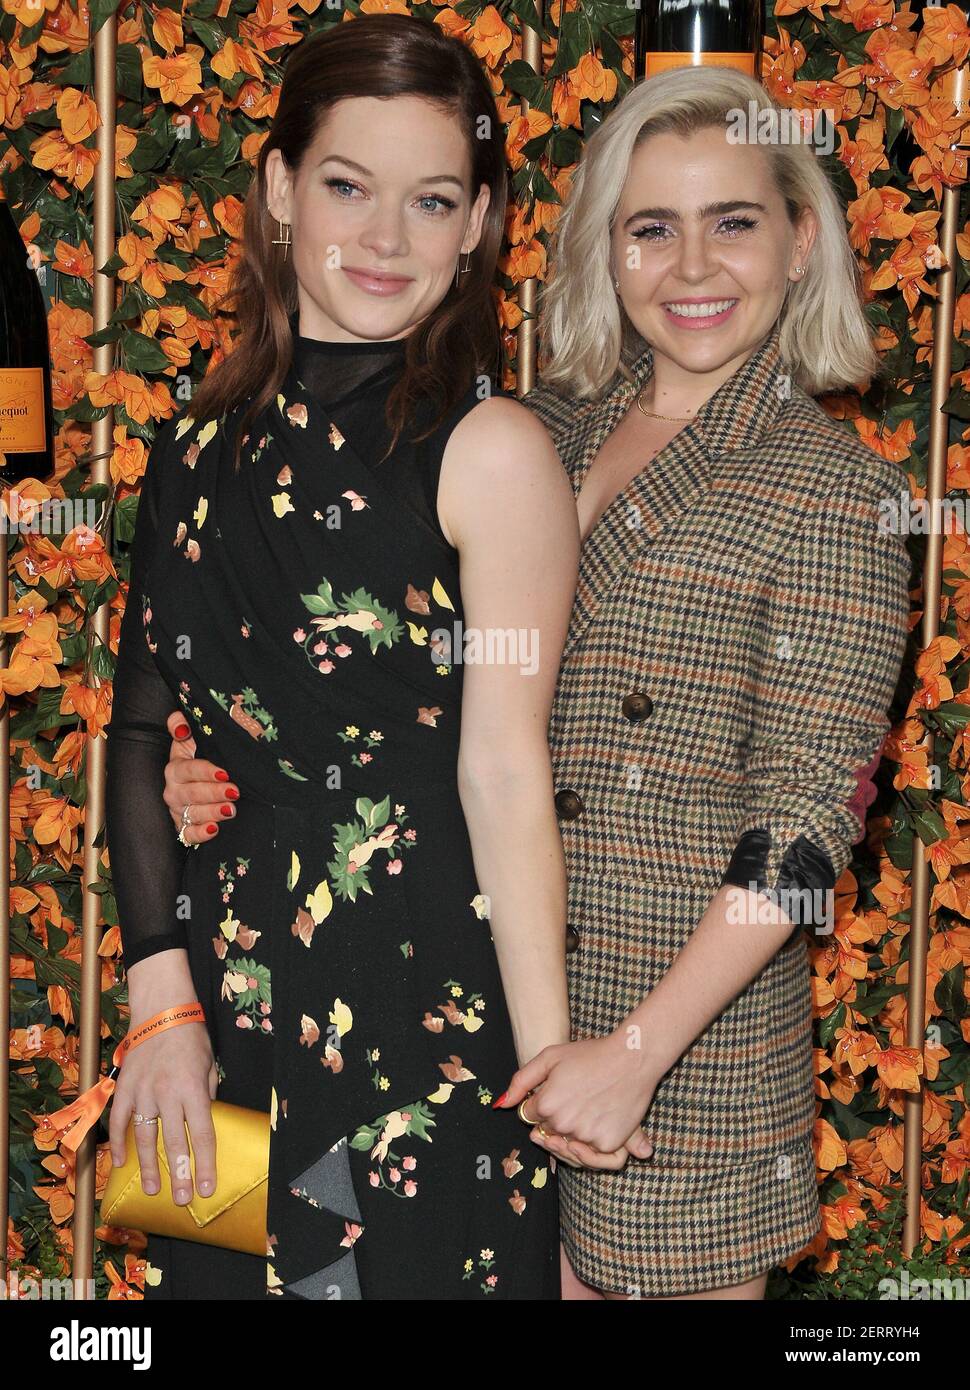 L-R) Jane Levy and Mae at the 9th Annual Veuve Clicquot Polo Classic Los Angeles held at the Will Rogers State Historic Park in Pacific Palisades, CA on Saturday, October 6,